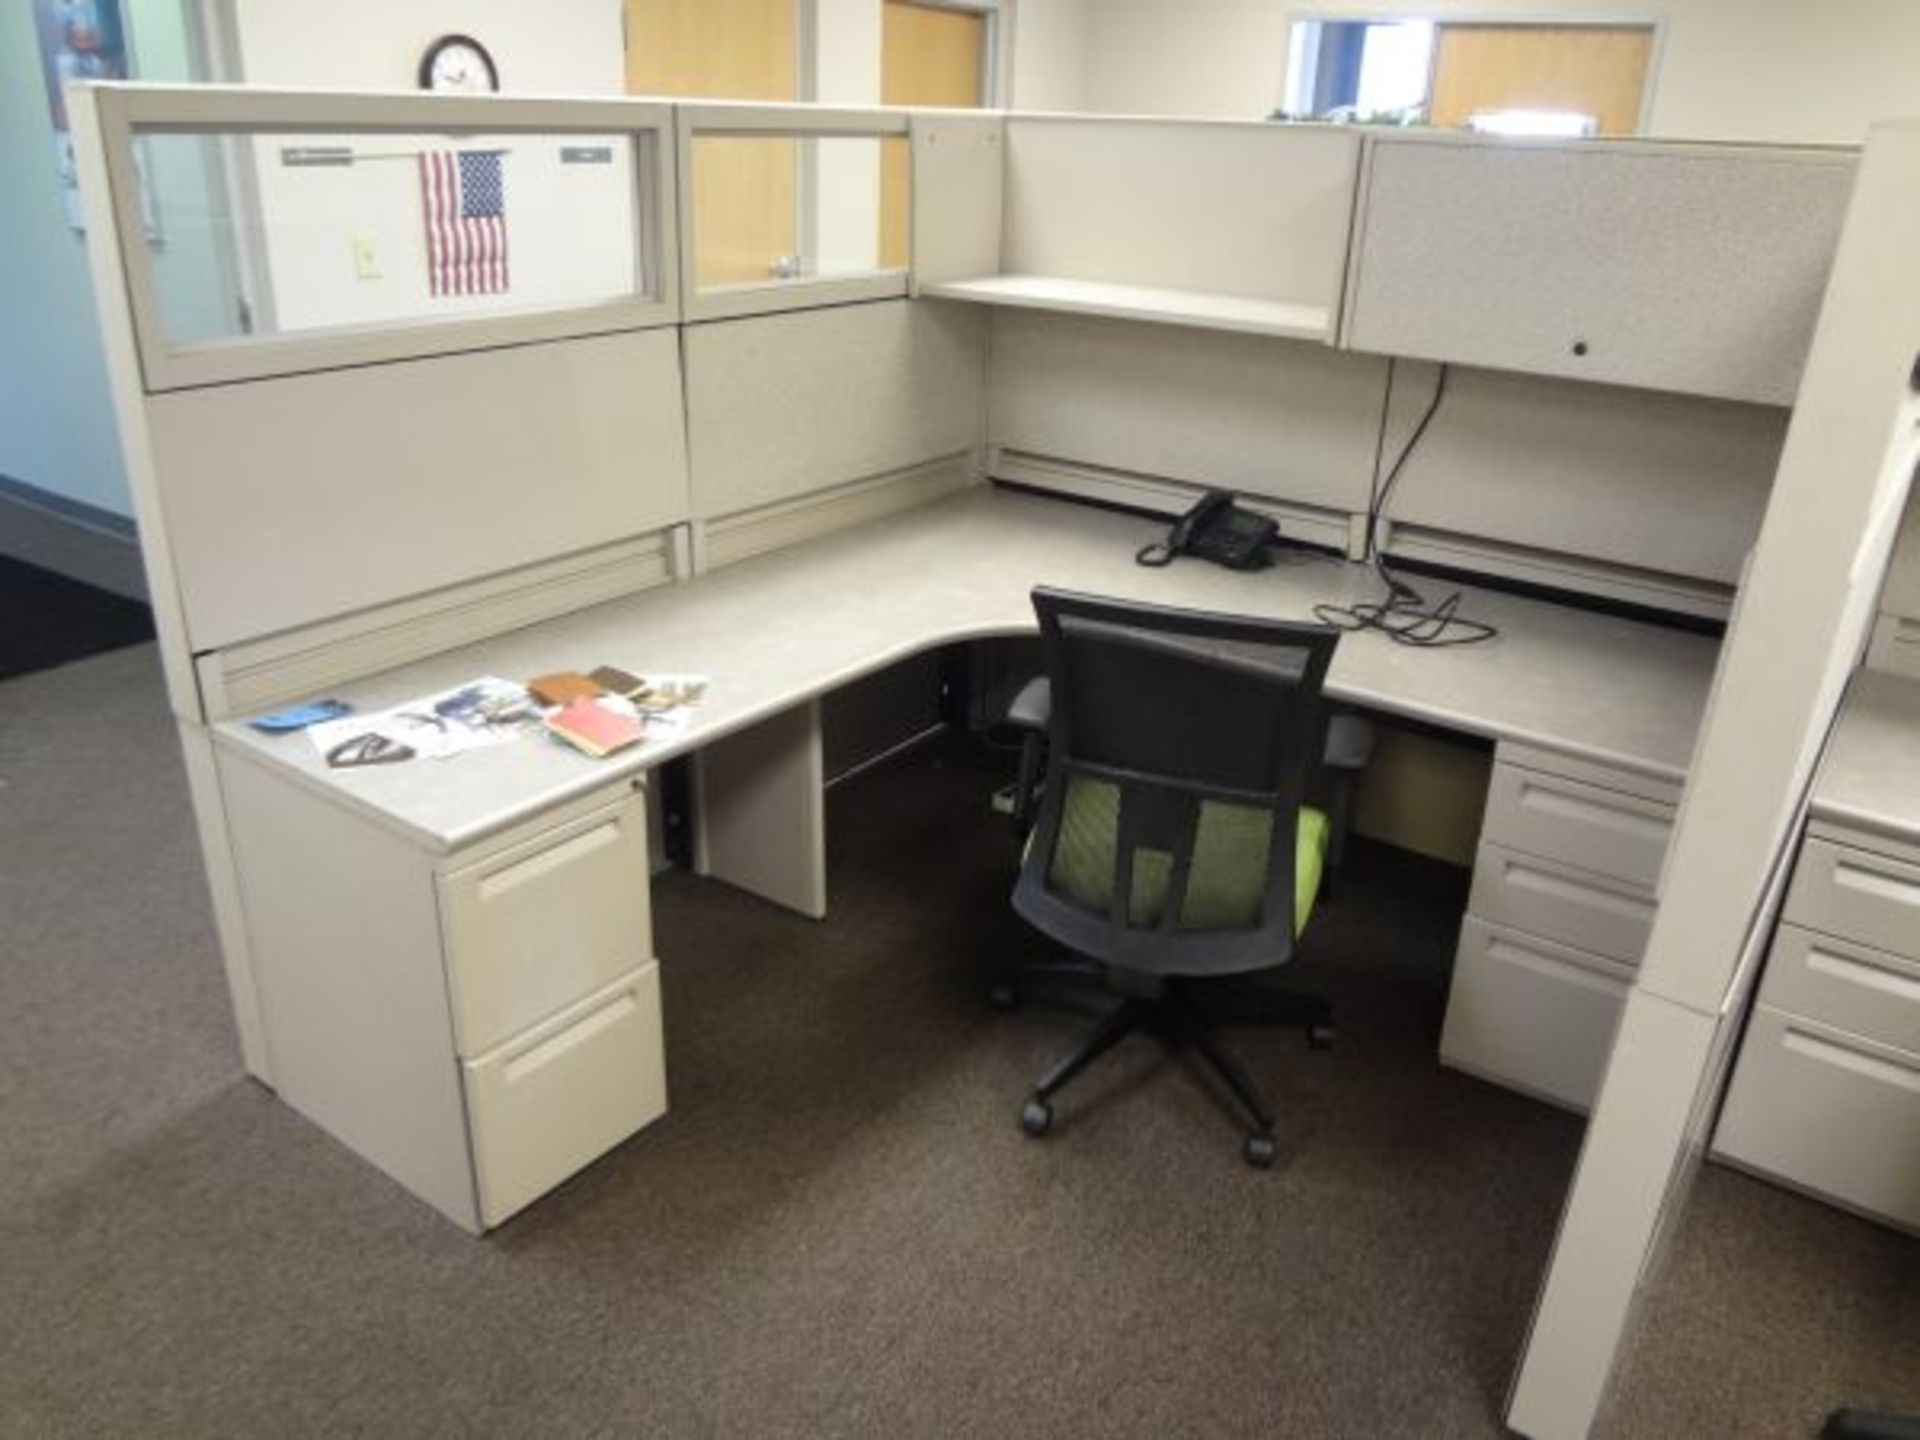 (LOT) 88" X 86" X 65" SIX-PERSON MARVELL MODULAR OFFICE INCLUDING (1) OVERHEAD CABINET, (1) OVERHEAD - Image 3 of 6